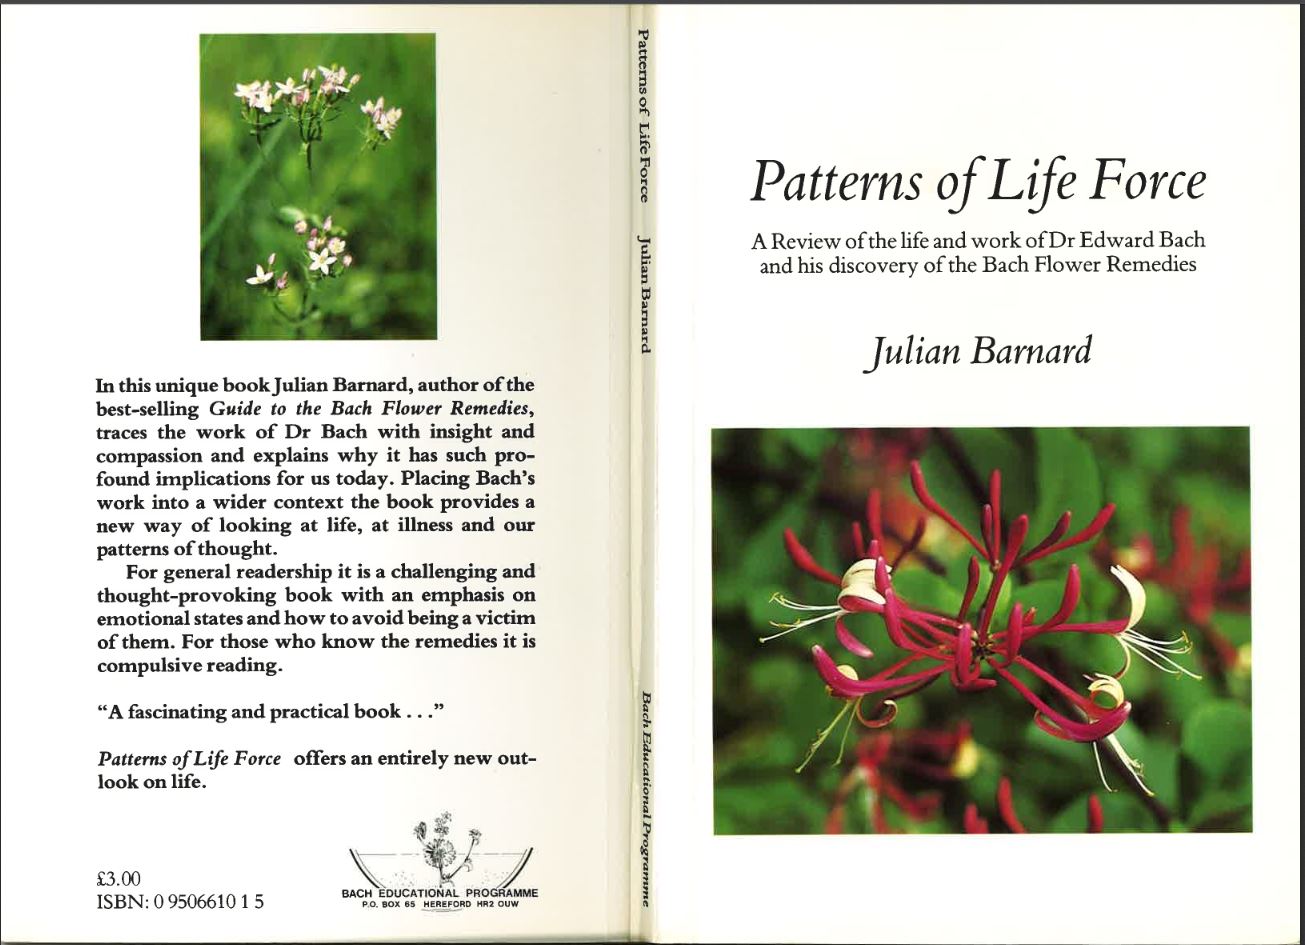 Patterns of Life Force